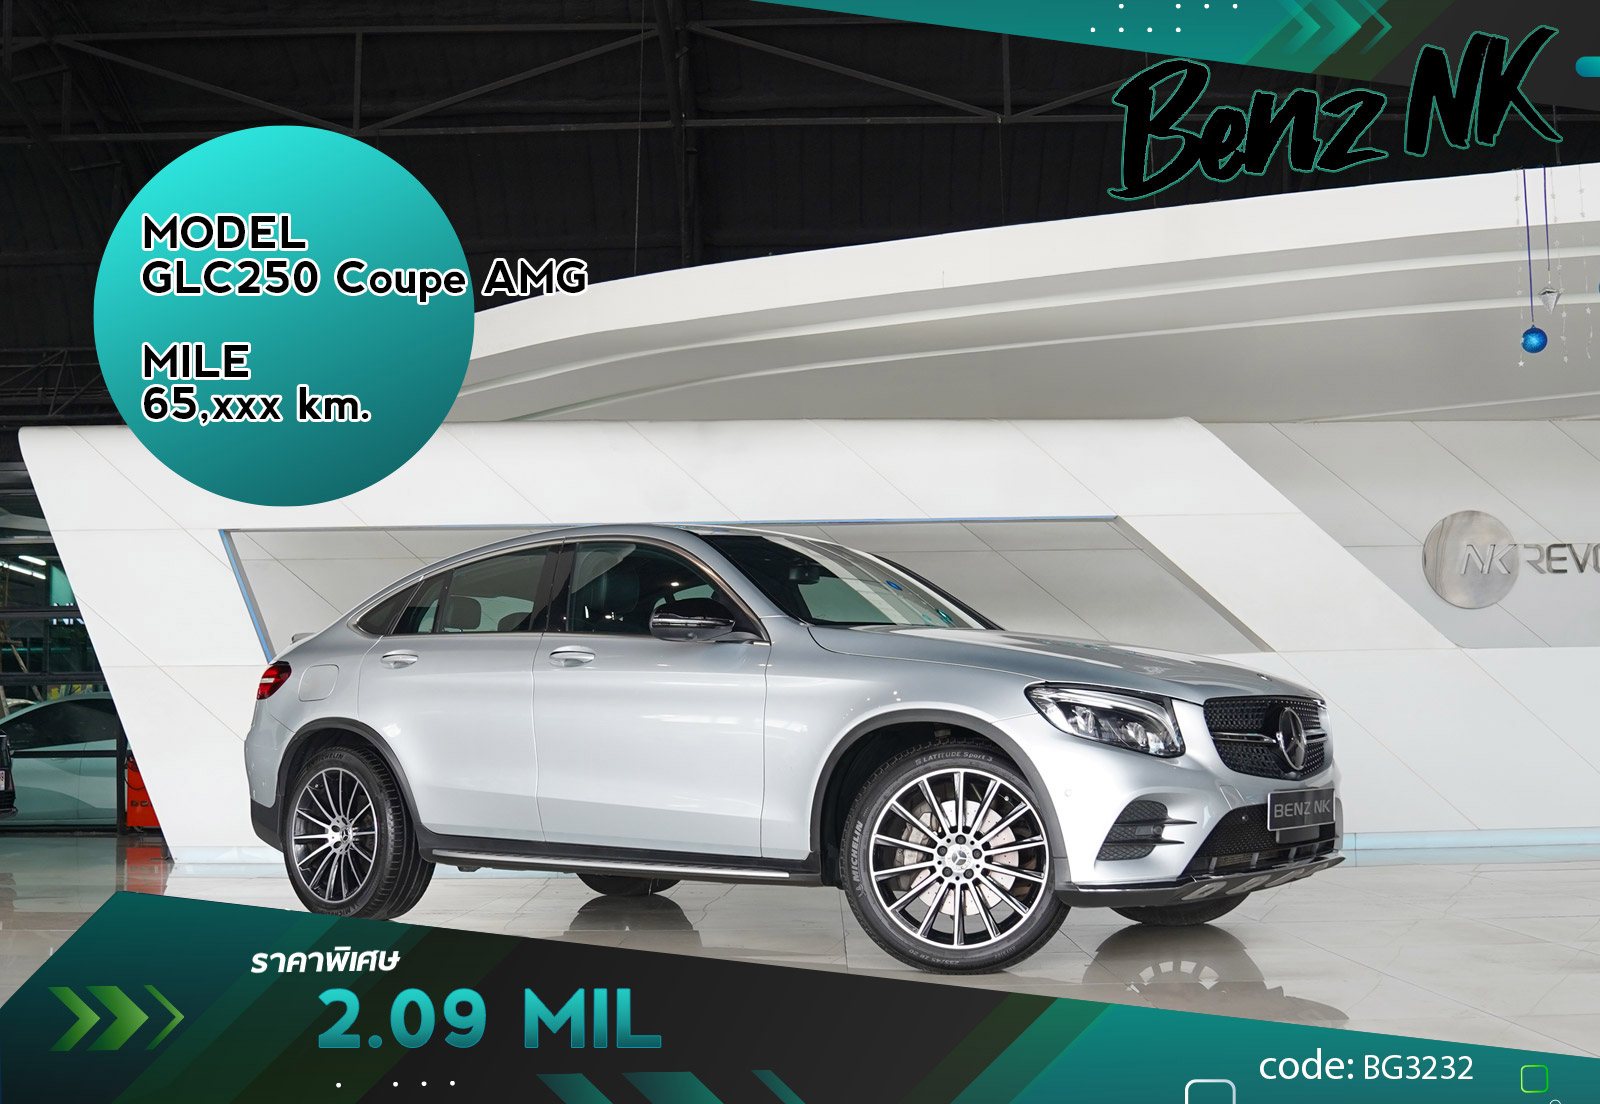 GLC250 Coupe AMG Mercedes Benz